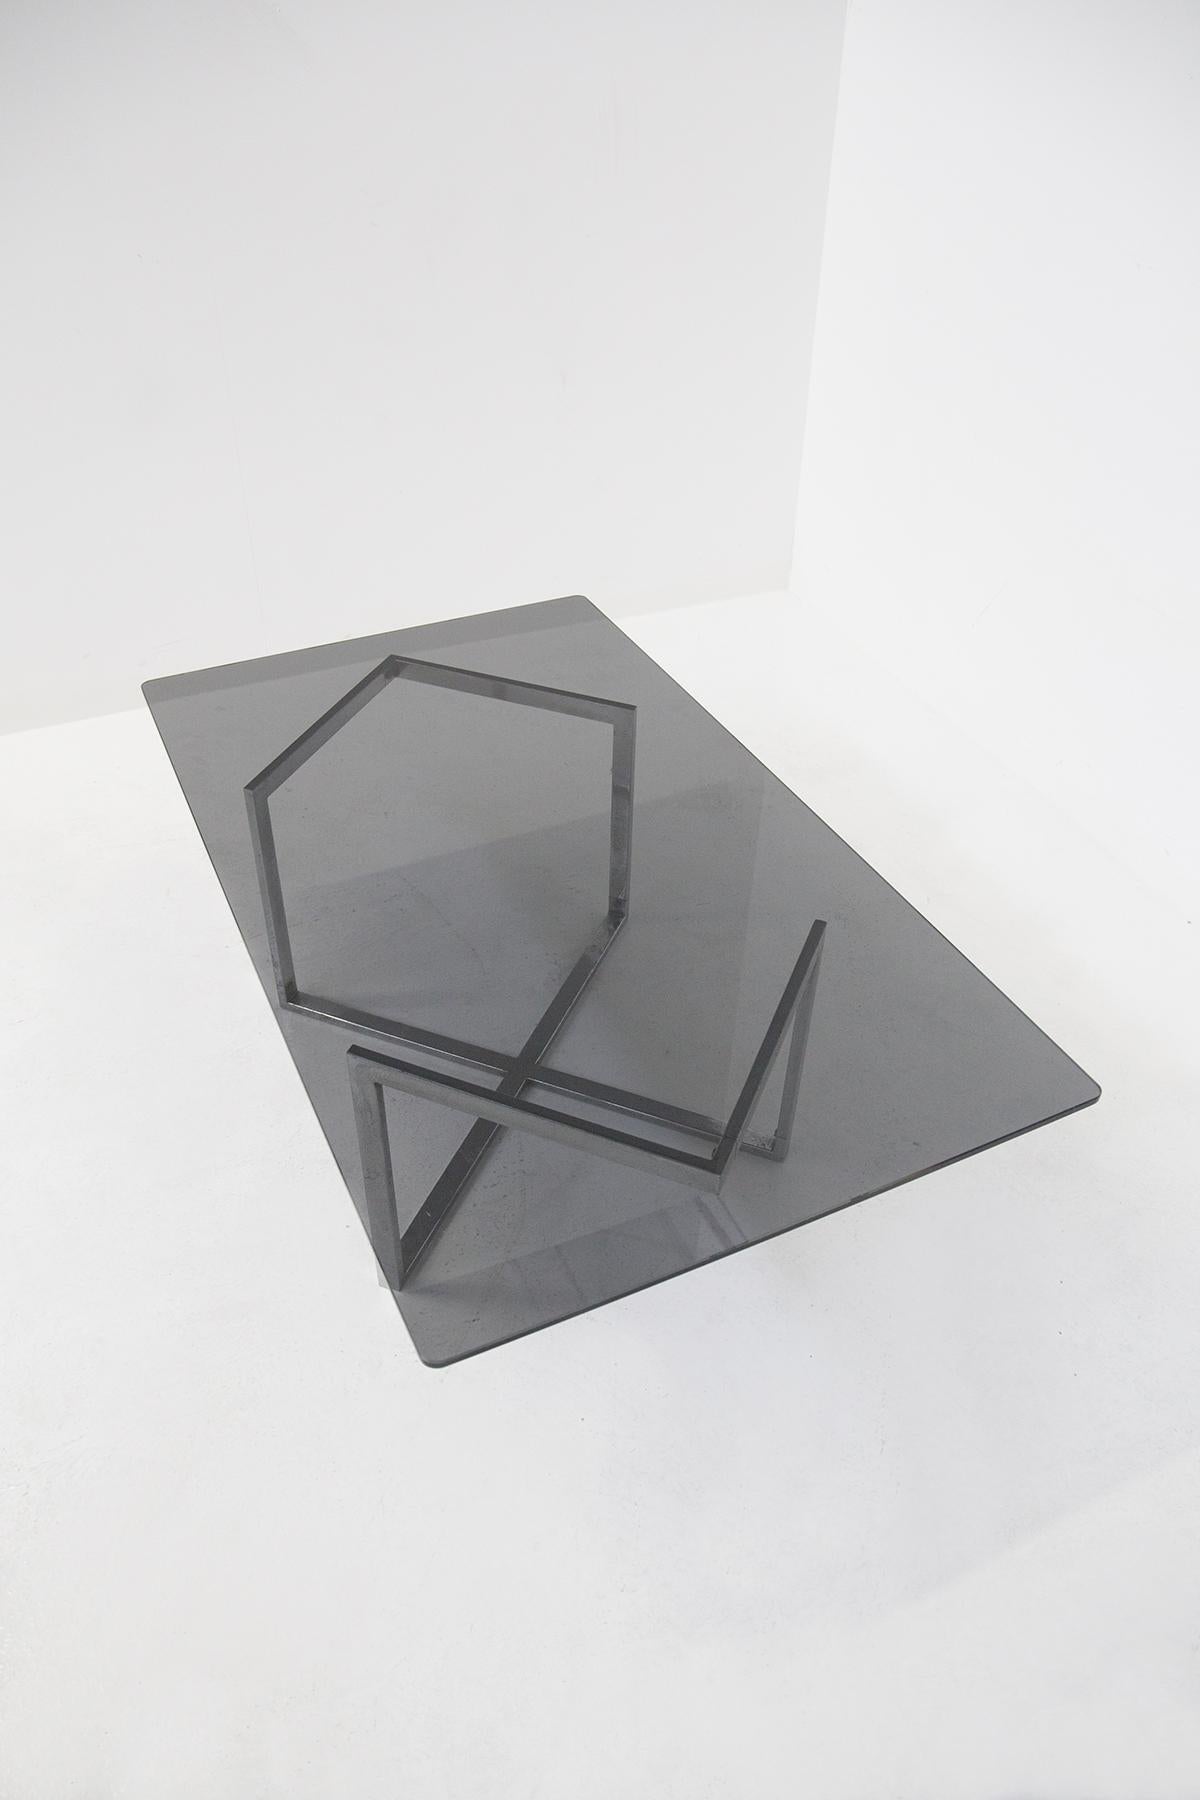 Italian Smoking Table in Glass and Steel by Vittorio Introini from Vip's Residence For Sale